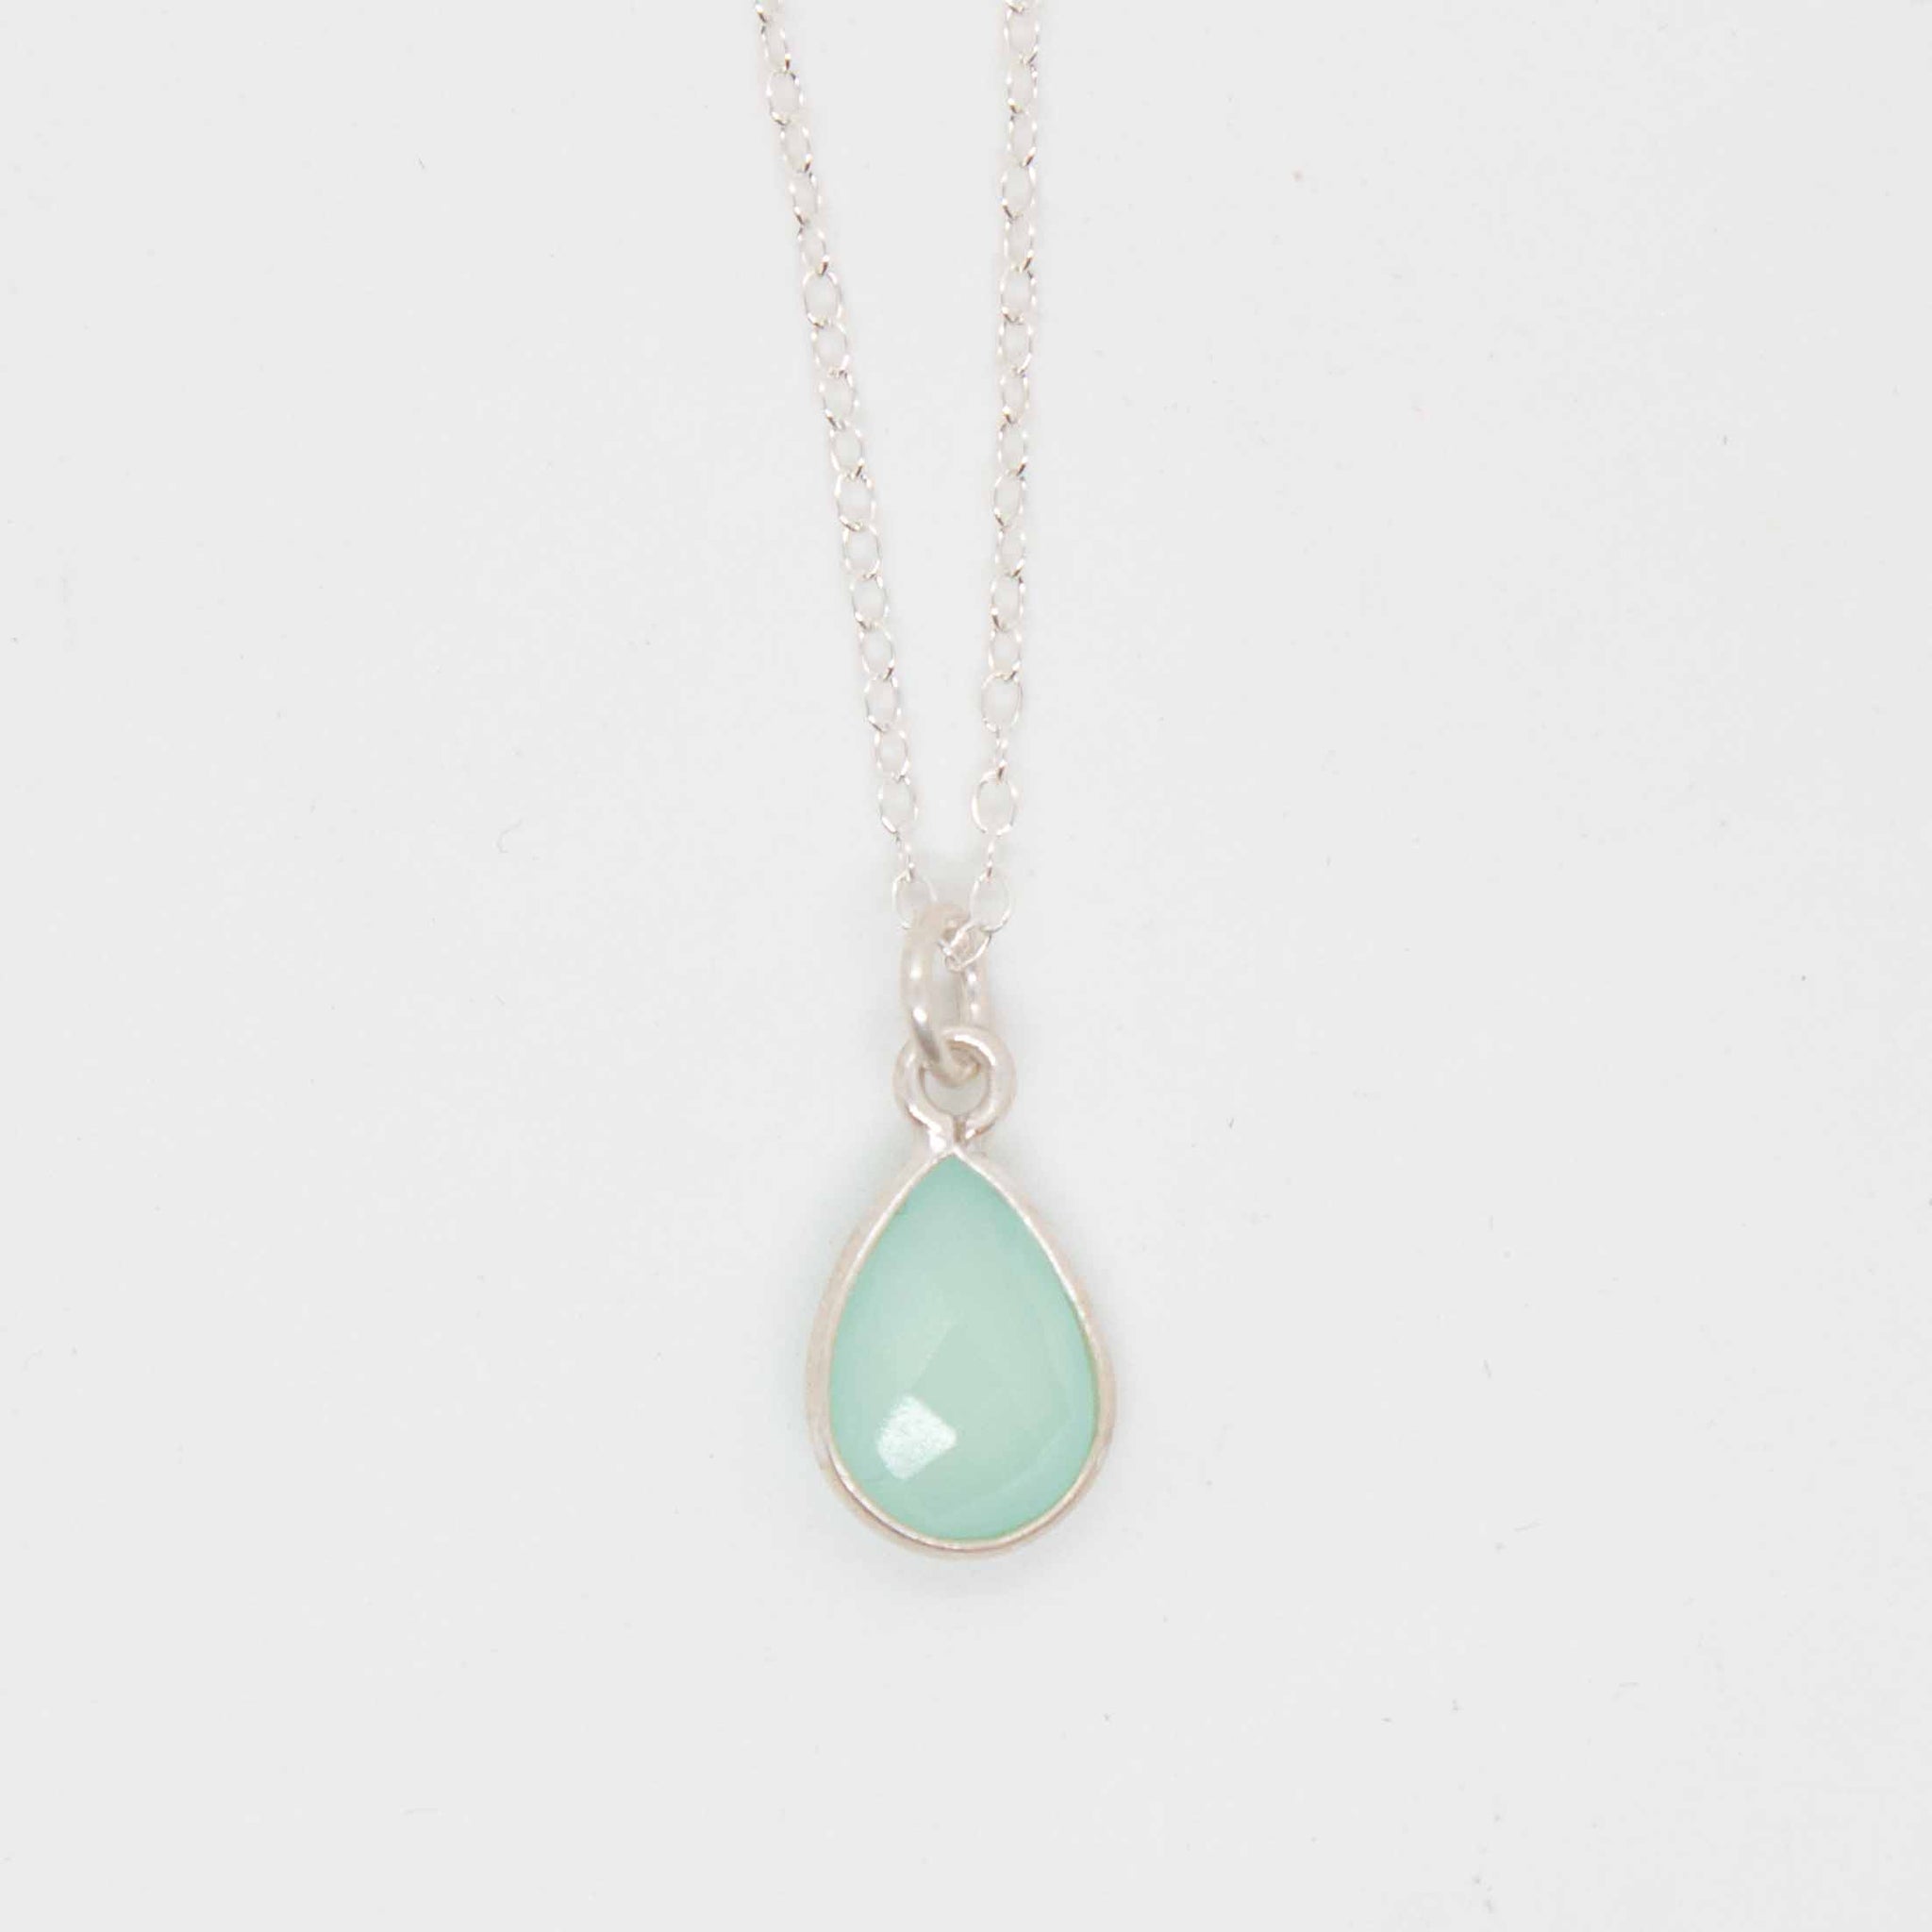 Summon the ocean with this classically beautiful chalcedony drop necklace. 18 or 20 inch sterling silver necklace with chalcedony drop pendant. Handmade in Toronto by kp jewelry co.